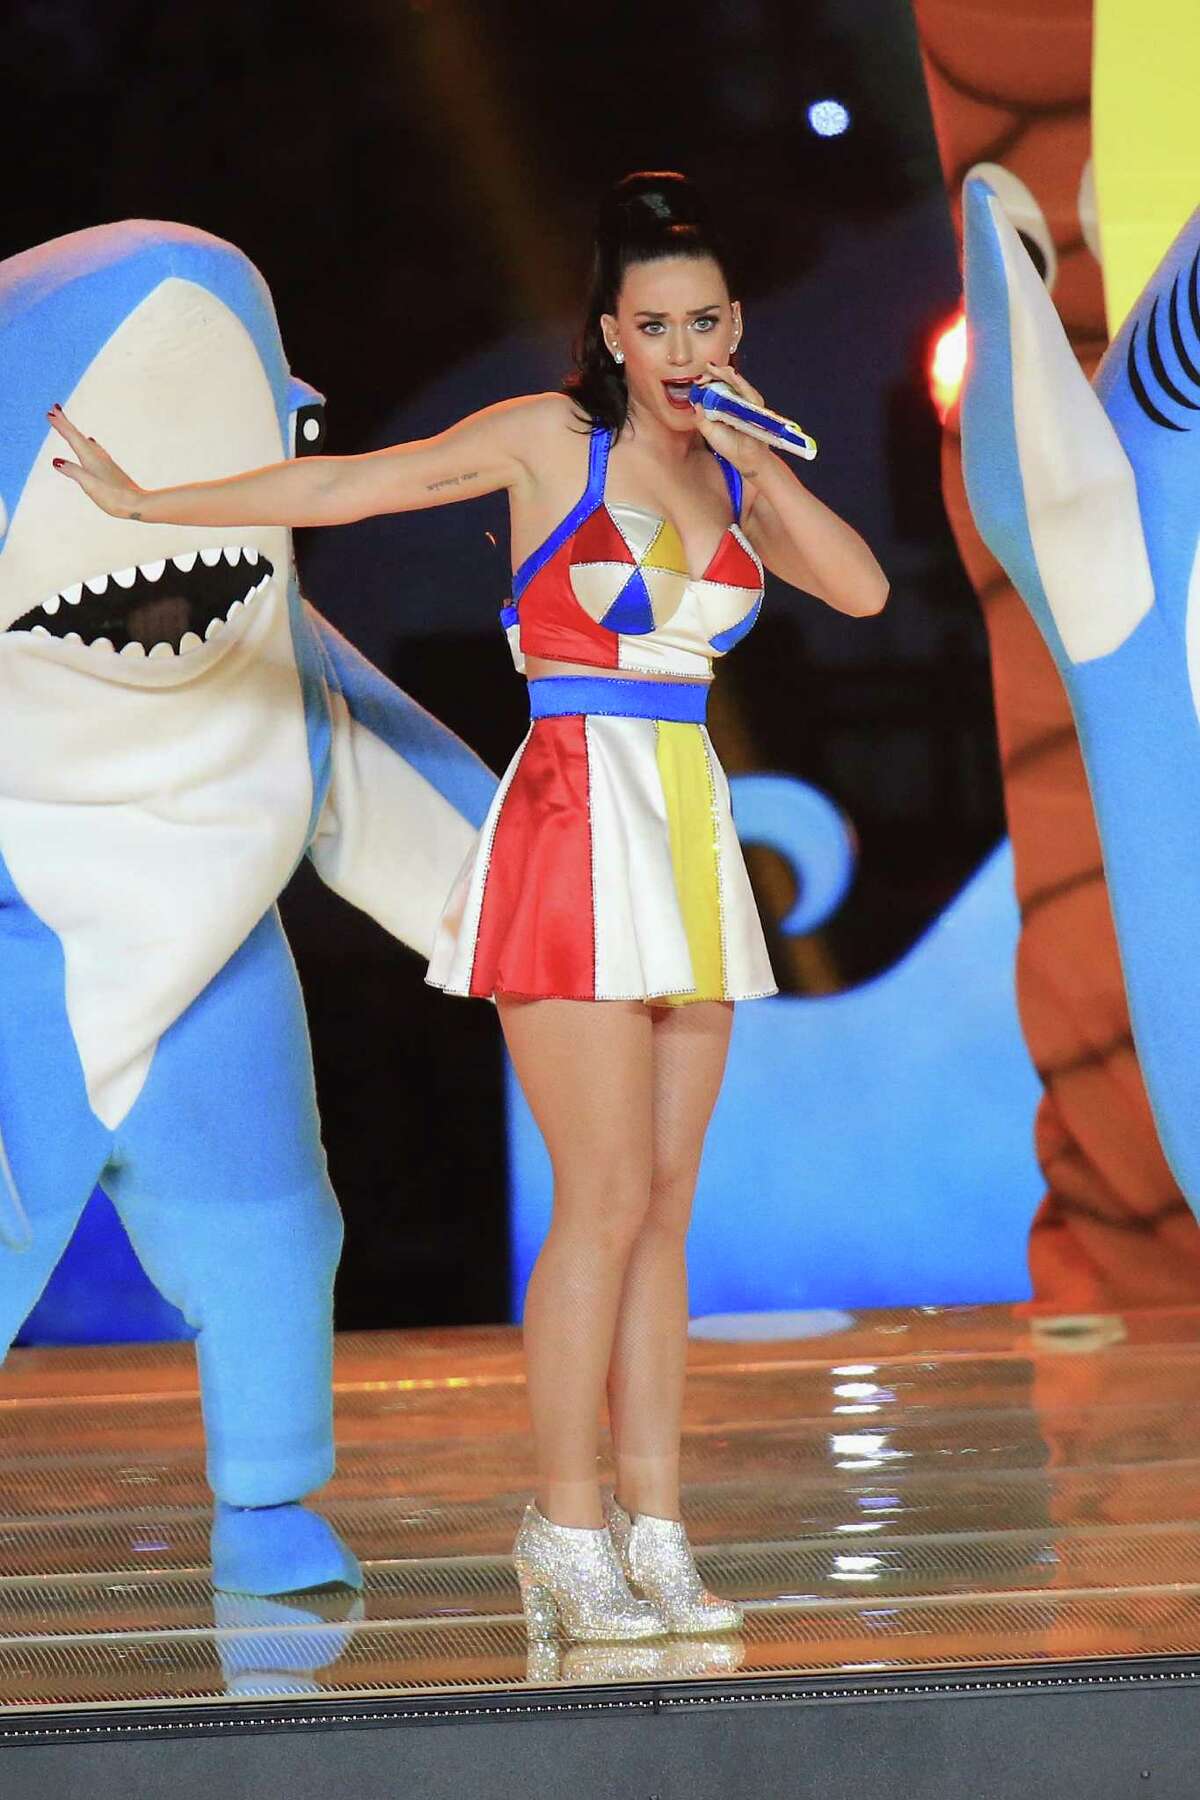 Recording artist Katy Perry performs onstage during the Pepsi Super Bowl XLIX Halftime Show at University of Phoenix Stadium on February 1, 2015 in Glendale, Arizona. (Photo by Christopher Polk/Getty Images) Premium Access Date created: February 01, 2015 Editorial #: 462640942 Restrictions: Contact your local office for all commercial or promotional uses. Full editorial rights UK, US, Ireland, Australia, NZ, Canada (not Quebec). Restricted editorial rights for daily newspapers elsewhere, please call. License type: Rights-managed Similar images View all Pepsi Super Bowl XLIX Halftime Show Pepsi Super Bowl XLIX Halftime Show Pepsi Super Bowl XLIX Halftime Show Pepsi Super Bowl XLIX Halftime Show Pepsi Super Bowl XLIX Halftime Show Pepsi Super Bowl XLIX Halftime Show Pepsi Super Bowl XLIX Halftime Show Pepsi Super Bowl XLIX Halftime Show Pepsi Super Bowl XLIX Halftime Show Pepsi Super Bowl XLIX Halftime Show Pepsi Super Bowl XLIX Halftime Show Pepsi Super Bowl XLIX Halftime Show Pepsi Super Bowl XLIX Halftime Show Pepsi Super Bowl XLIX Halftime Show Pepsi Super Bowl XLIX Halftime Show Pepsi Super Bowl XLIX Halftime Show Pepsi Super Bowl XLIX Halftime Show Pepsi Super Bowl XLIX Halftime Show Pepsi Super Bowl XLIX Halftime Show Pepsi Super Bowl XLIX Halftime Show Pepsi Super Bowl XLIX Halftime Show Pepsi Super Bowl XLIX Halftime Show Pepsi Super Bowl XLIX Halftime Show Pepsi Super Bowl XLIX Halftime Show Pepsi Super Bowl XLIX Halftime Show Pepsi Super Bowl XLIX Halftime Show Pepsi Super Bowl XLIX Halftime Show Pepsi Super Bowl XLIX Halftime Show Pepsi Super Bowl XLIX Halftime Show Pepsi Super Bowl XLIX Halftime Show EXPLORE THE NEW...